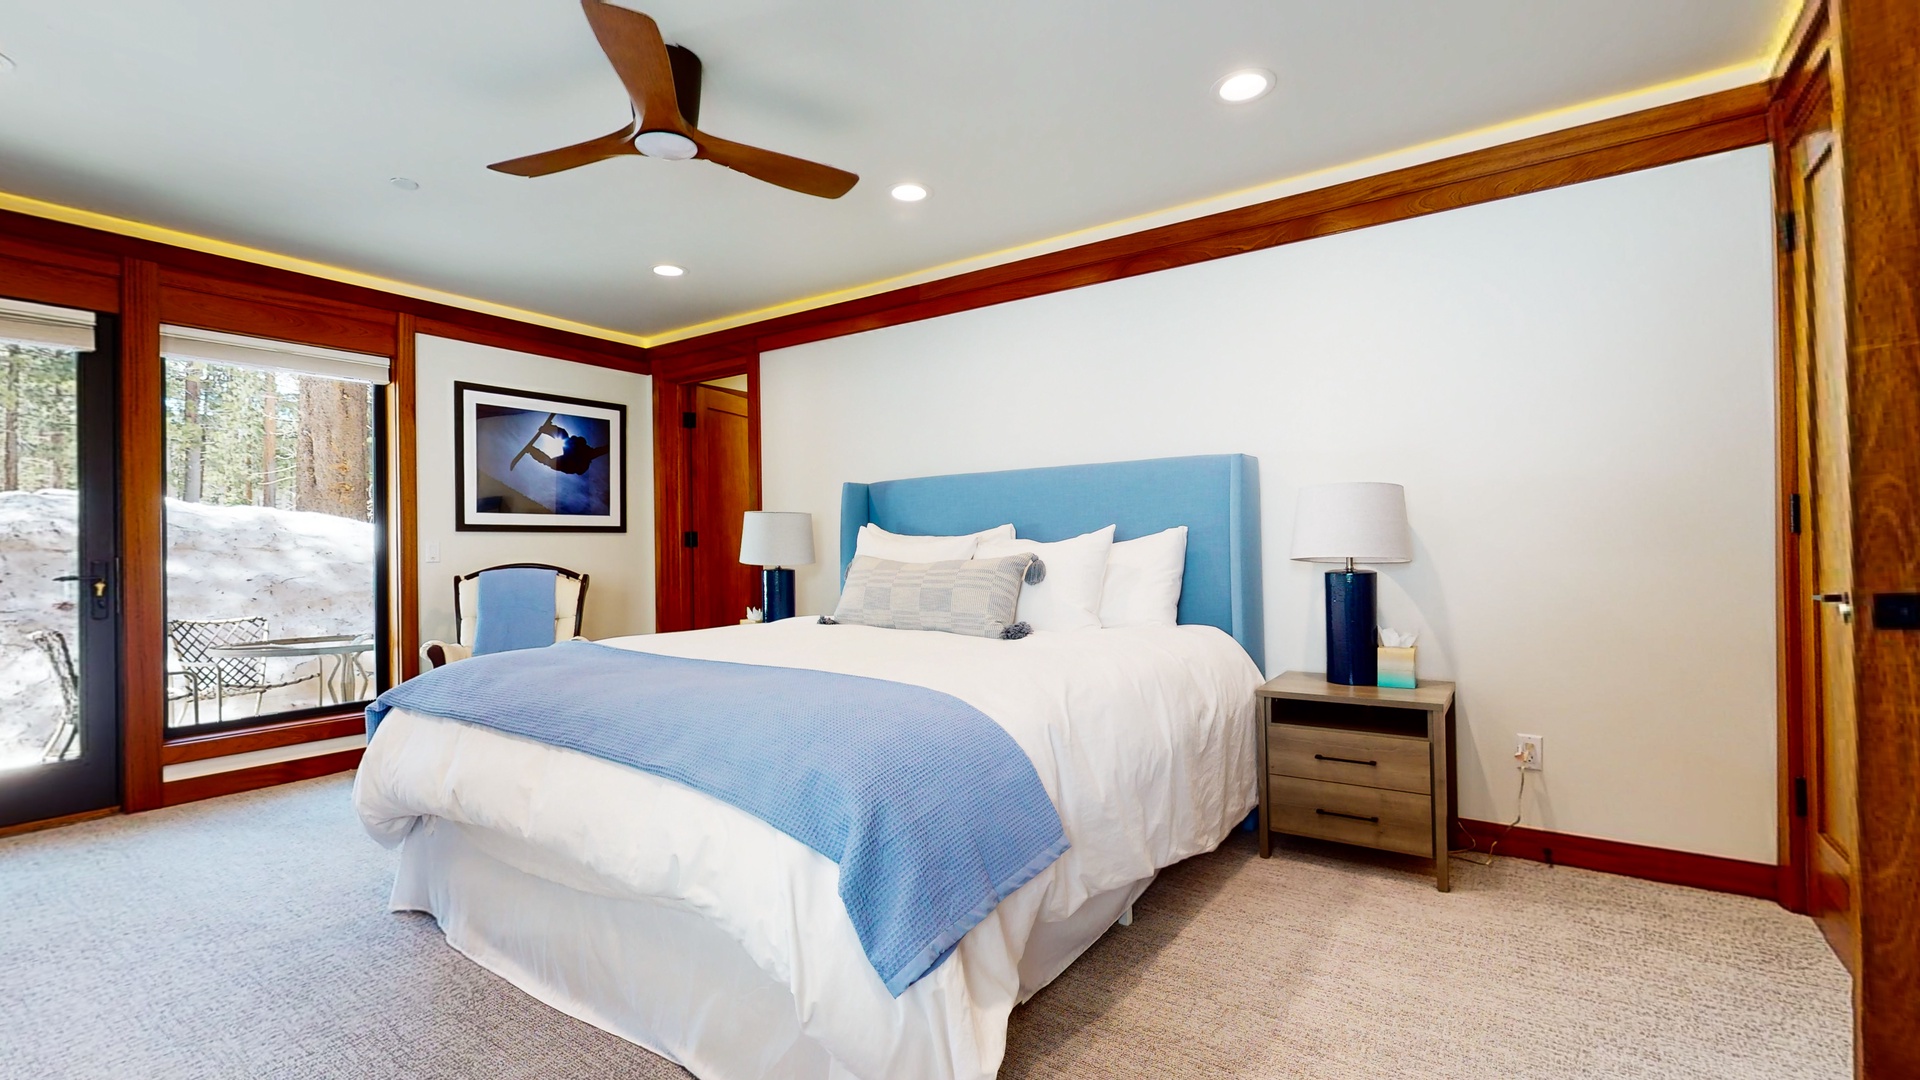 The 1st floor king suite boasts an en suite, Smart TV, deck access, and additional queen trundle